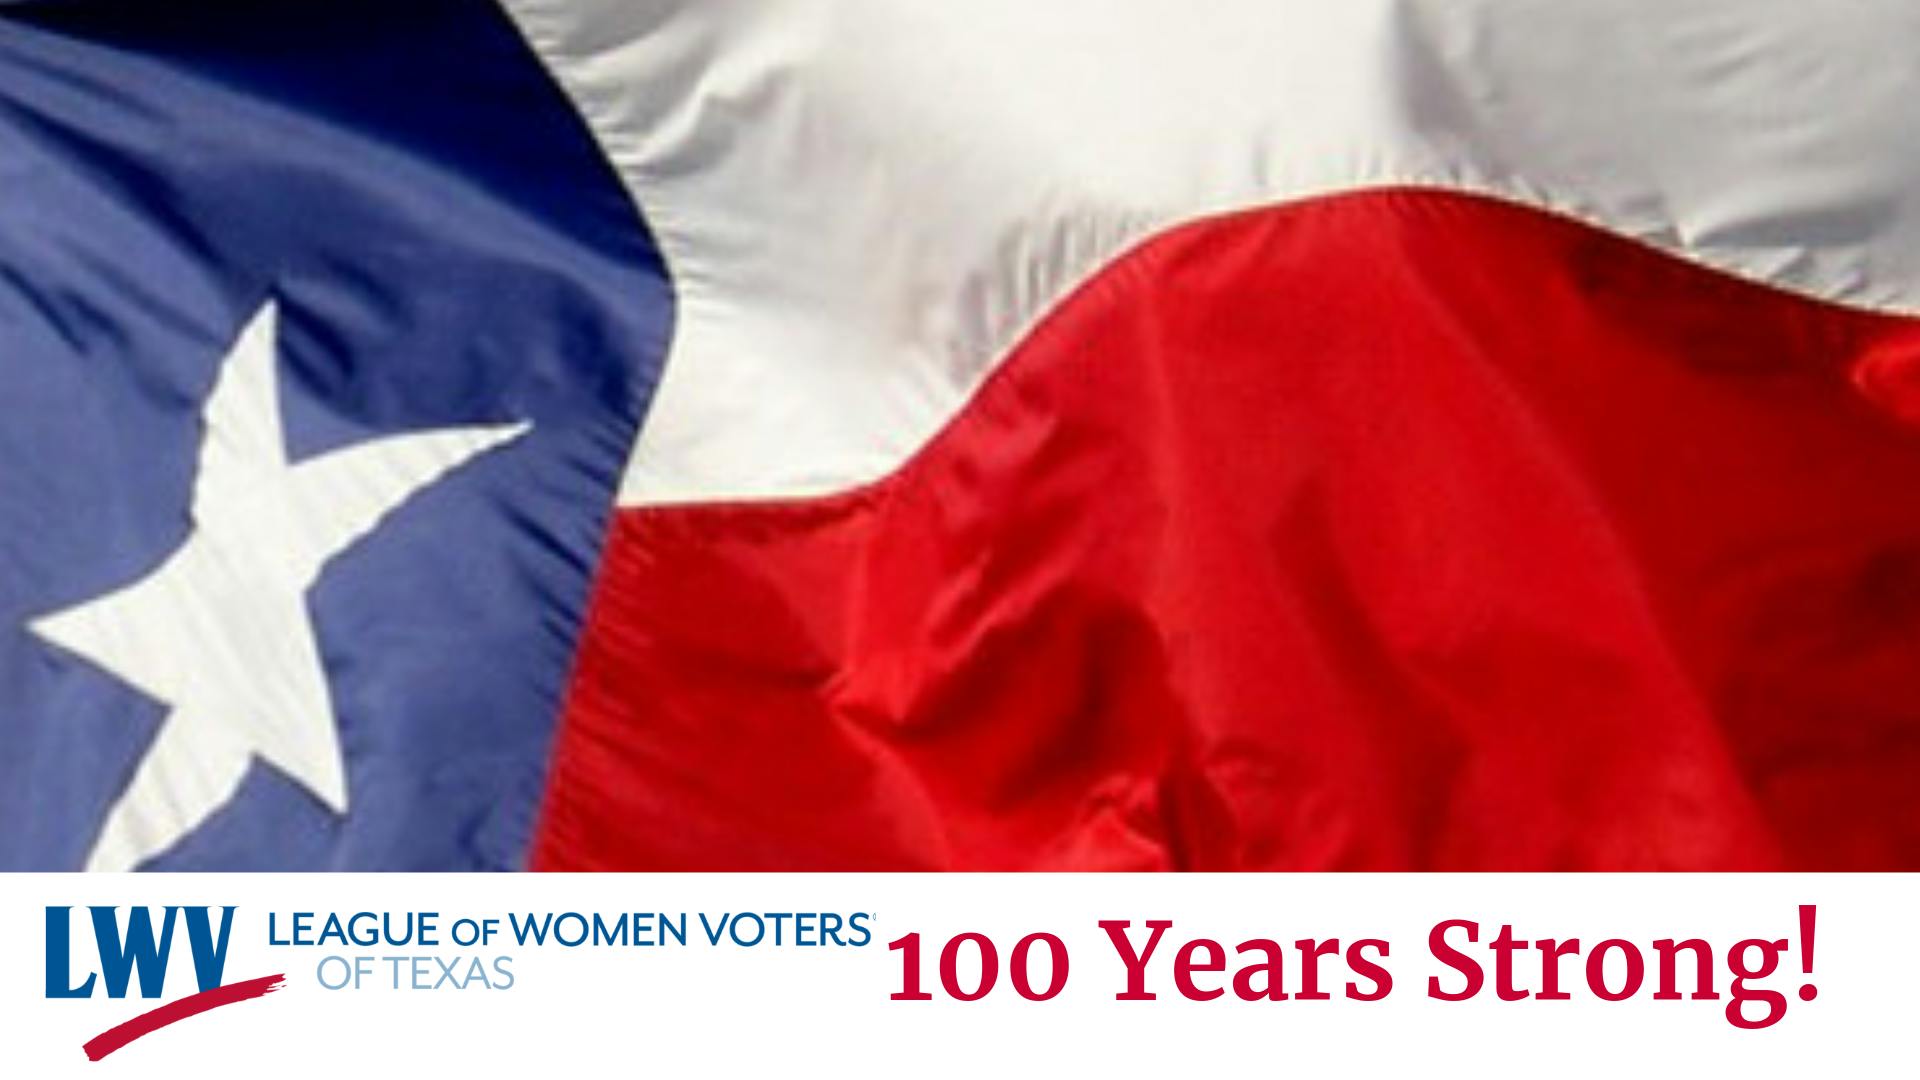 LWV Texas 100 Year Anniversary Event Sponsorship (includes event tickets)